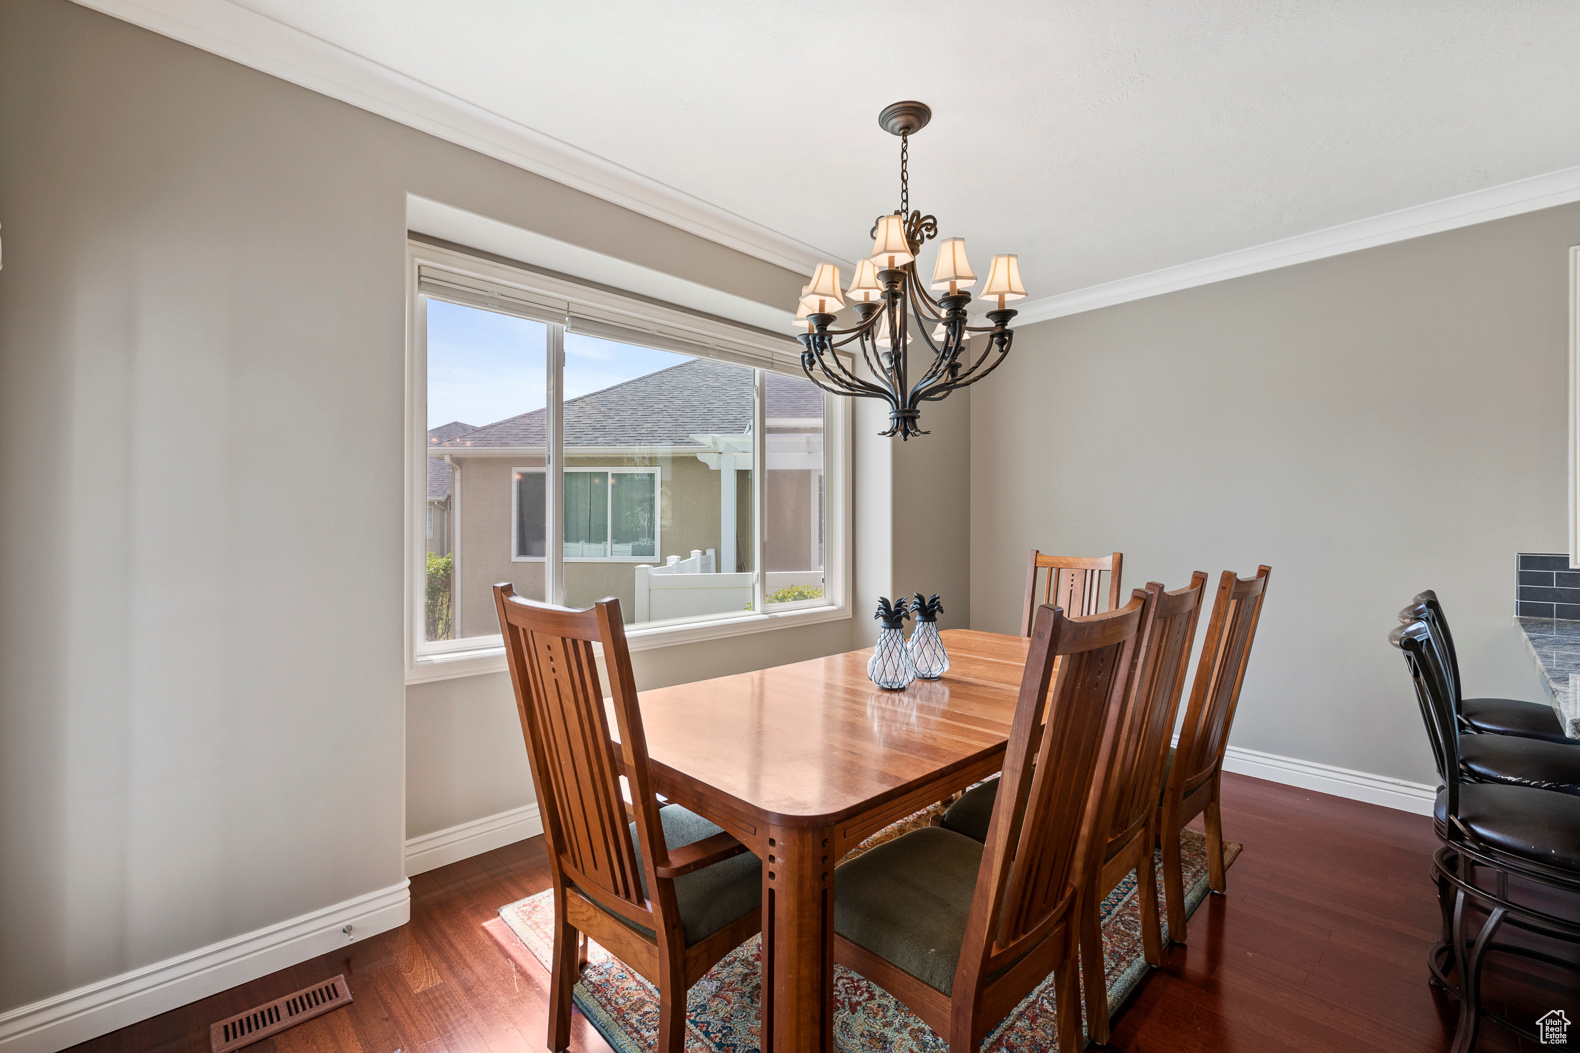 Dining space with an inviting chandelier, dark wood-type flooring, and crown molding